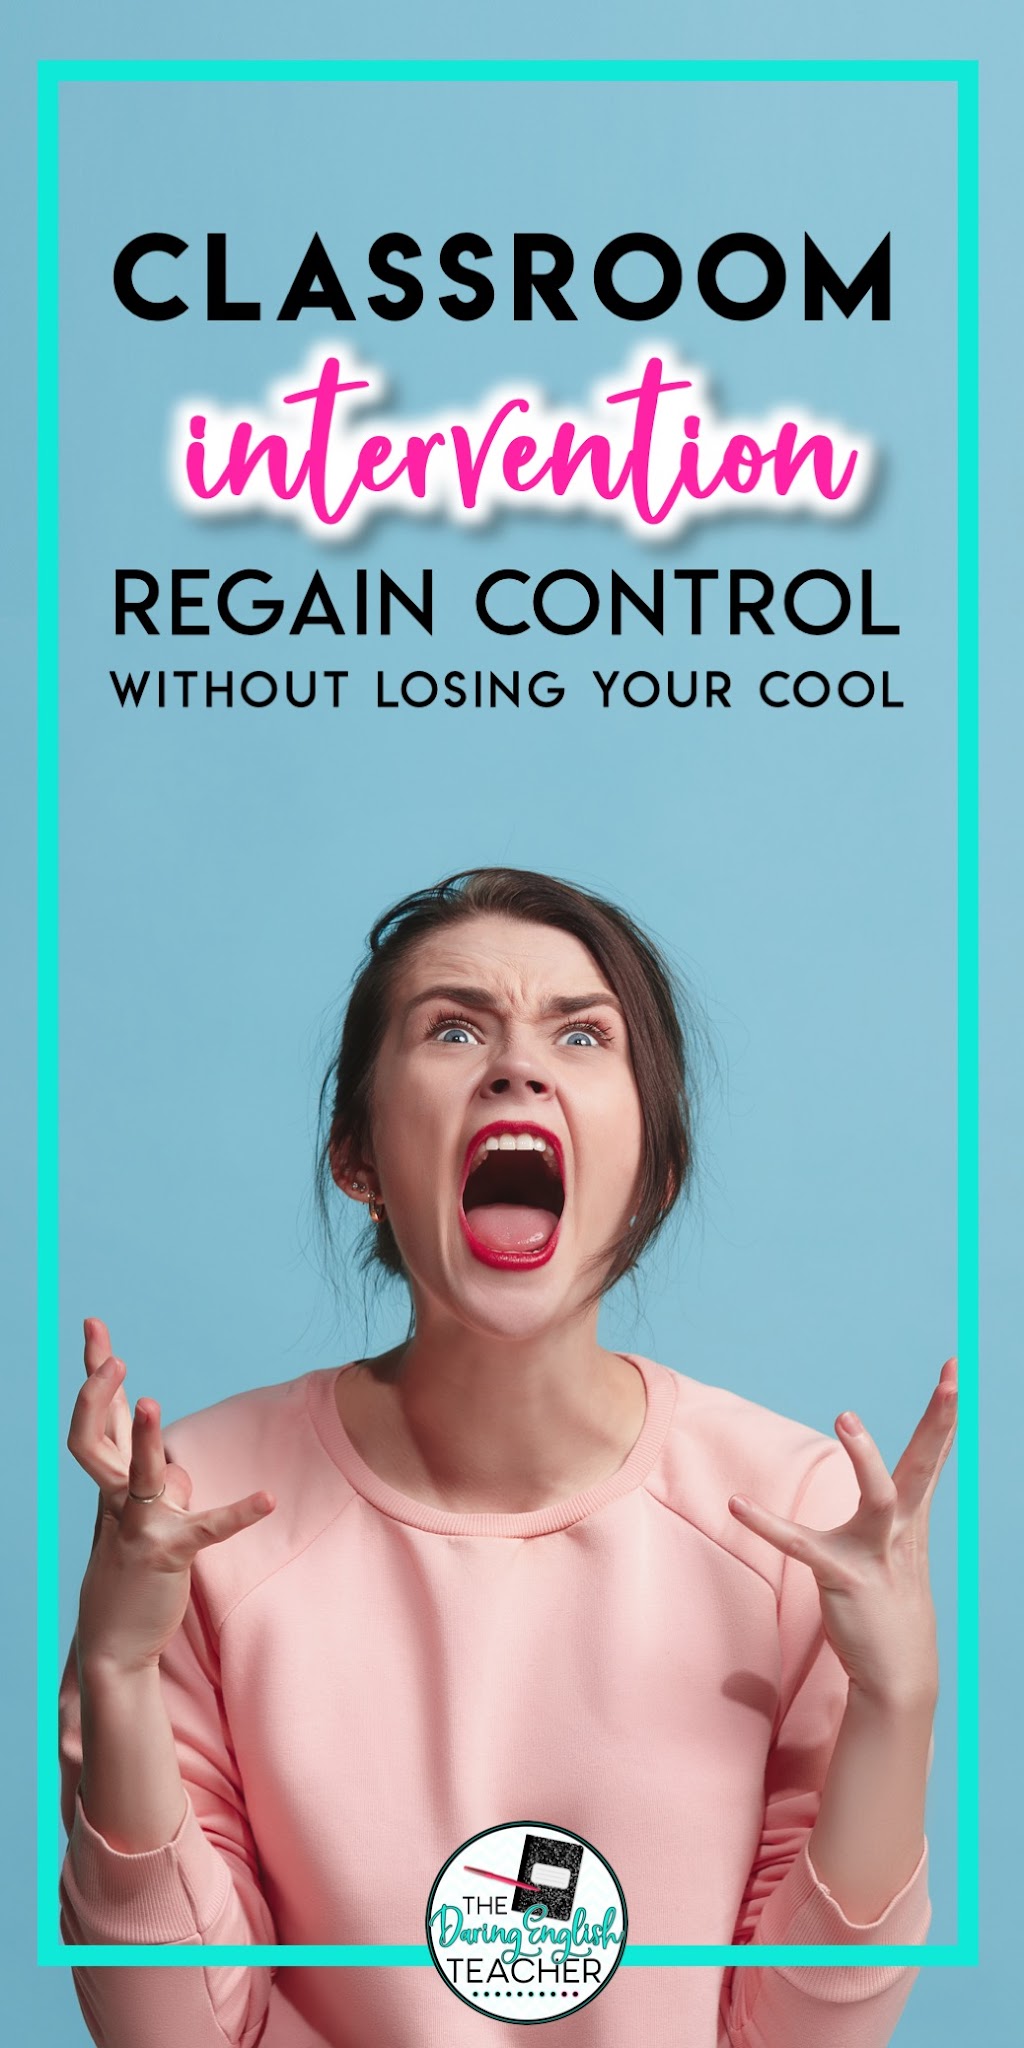 Classroom Intervention: Regain Control of Your Classroom Without Losing Your Cool